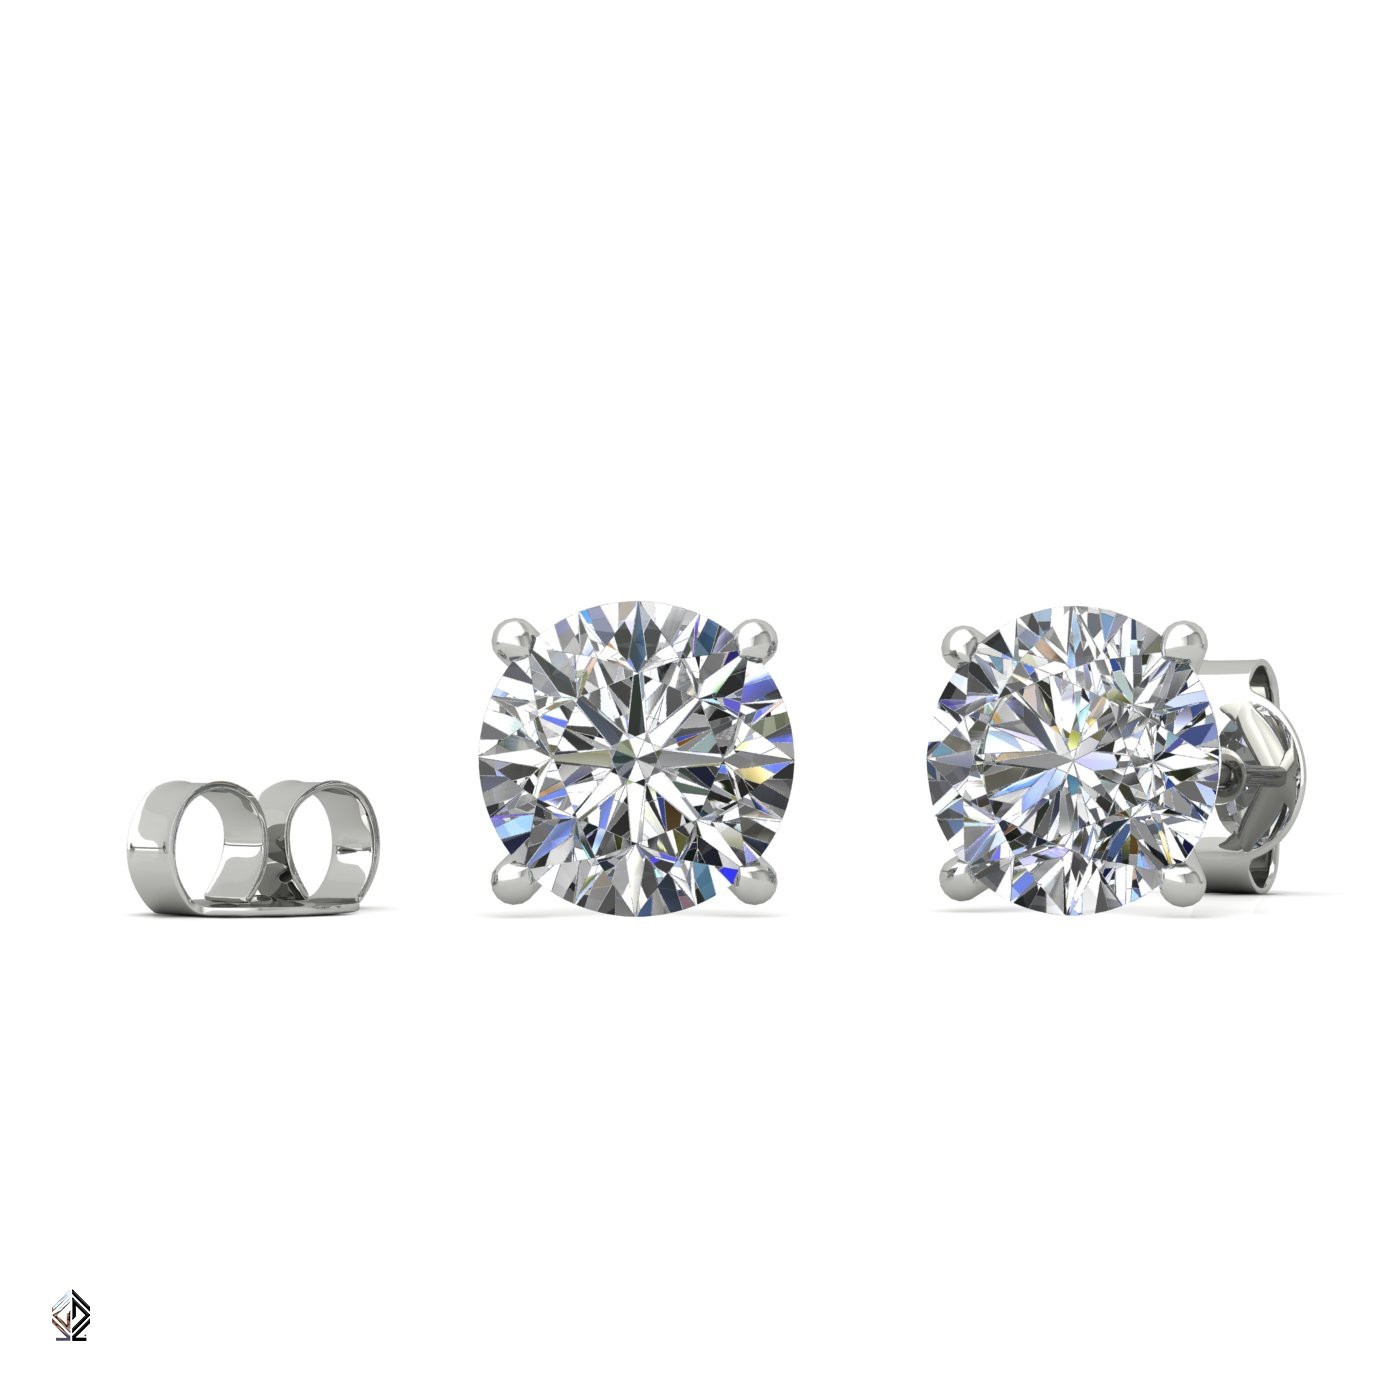 18k white gold 0,3 ct 4 prongs round cut classic diamond earring studs Photos & images